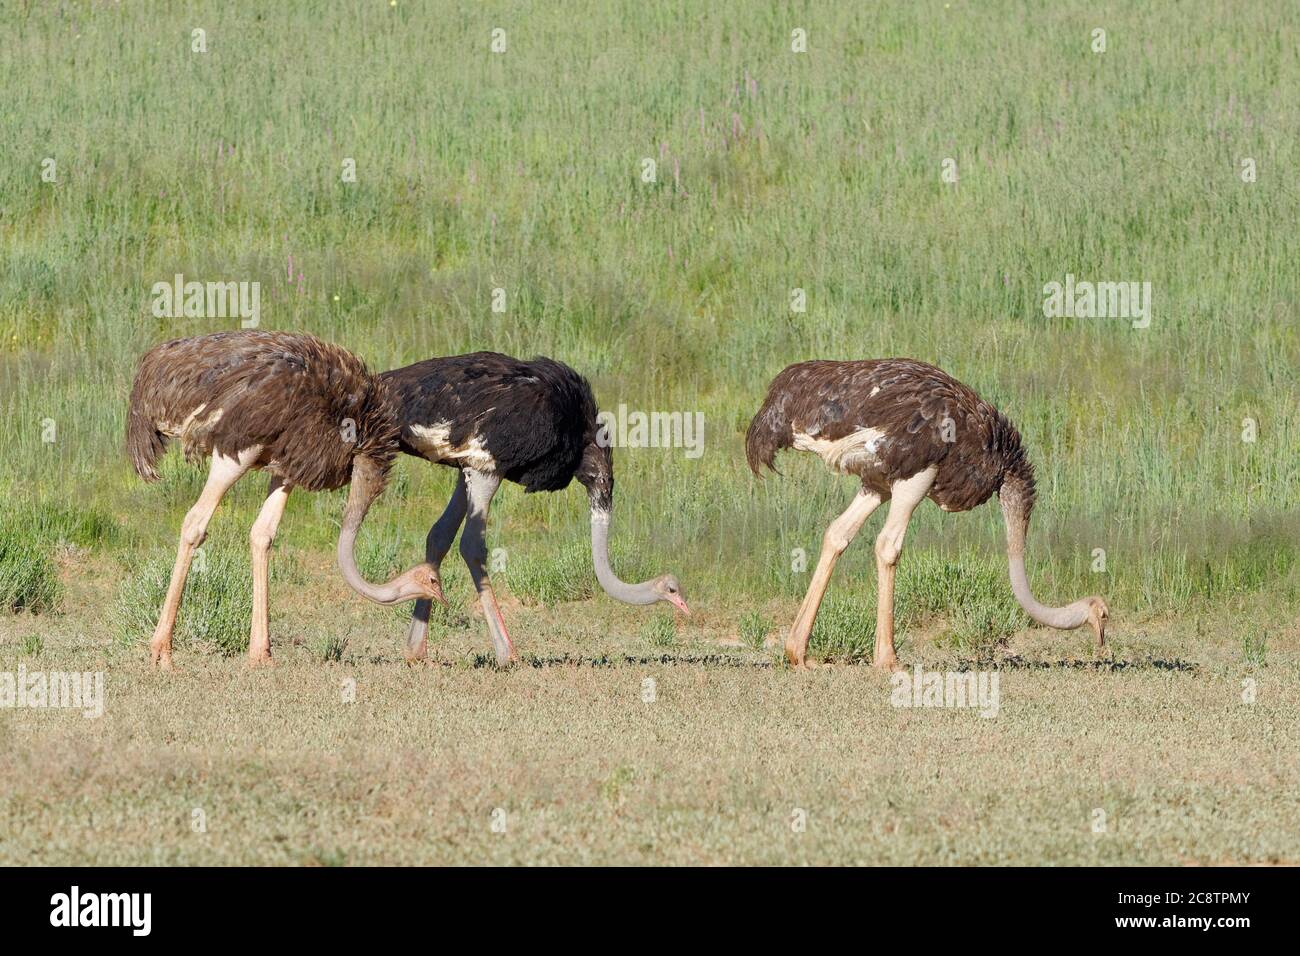 Common ostriches (Struthio camelus), adults, male and females, searching for food, Kgalagadi Transfrontier Park, Northern Cape, South Africa, Africa Stock Photo